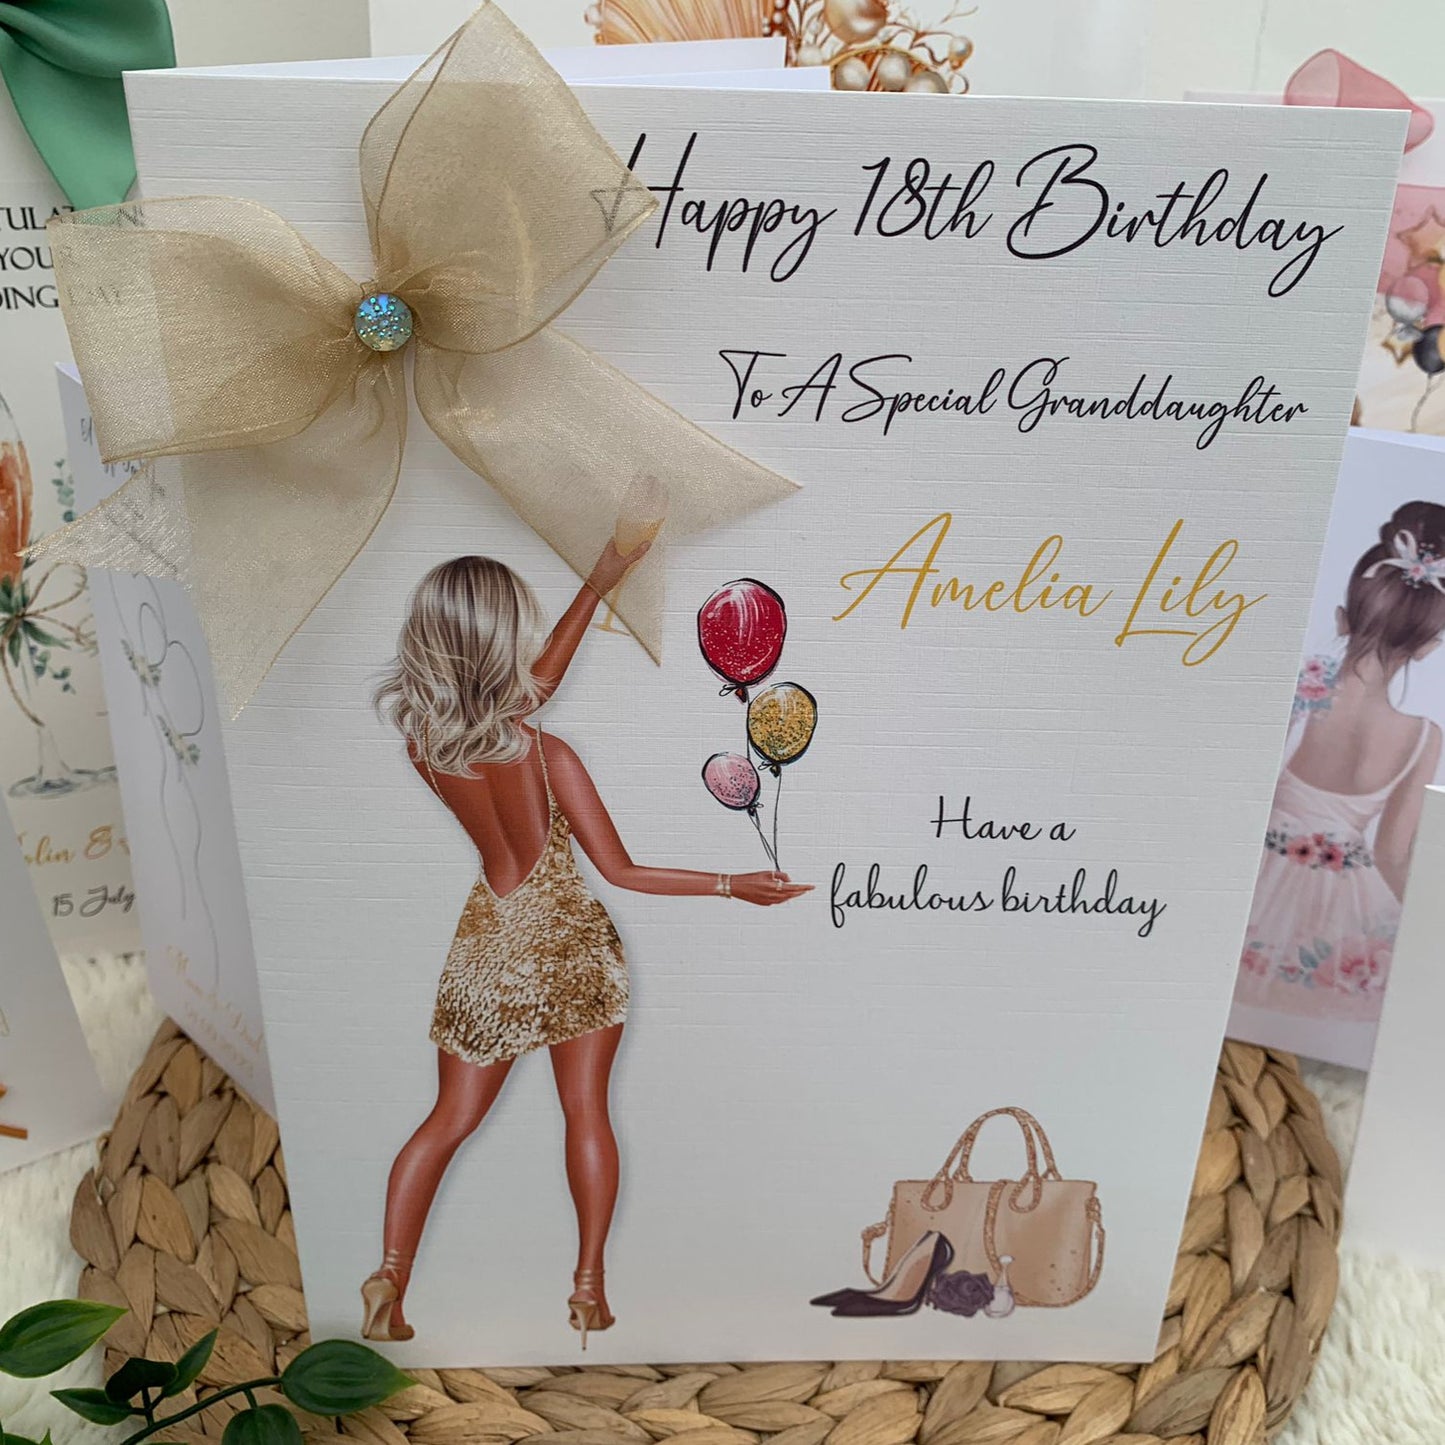 a birthday card with a picture of a woman holding a balloon